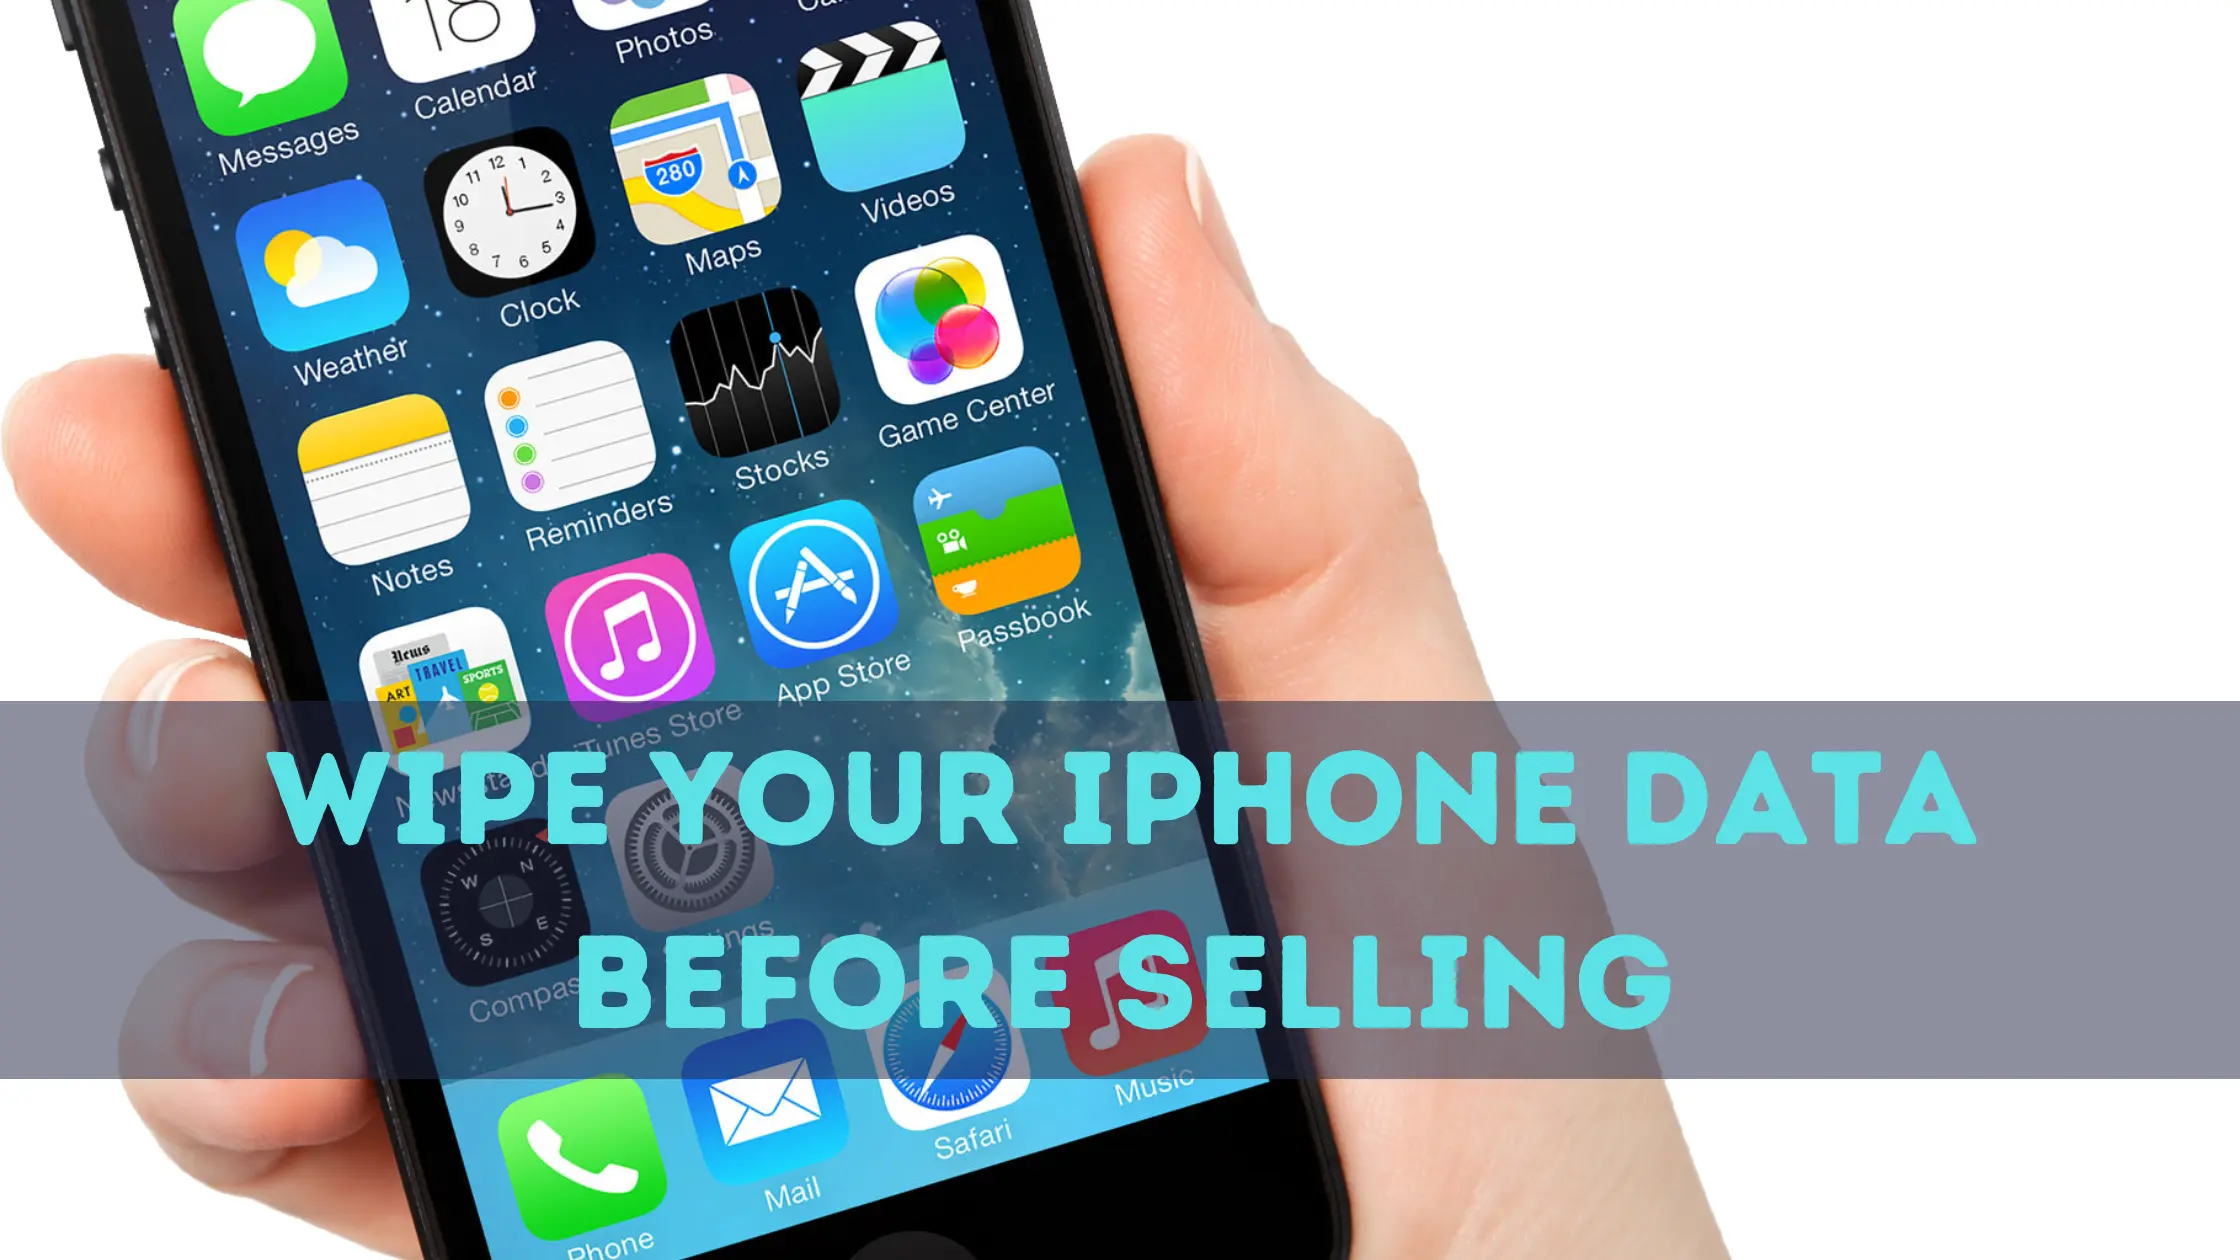 Wipe Your iPhone Before Selling